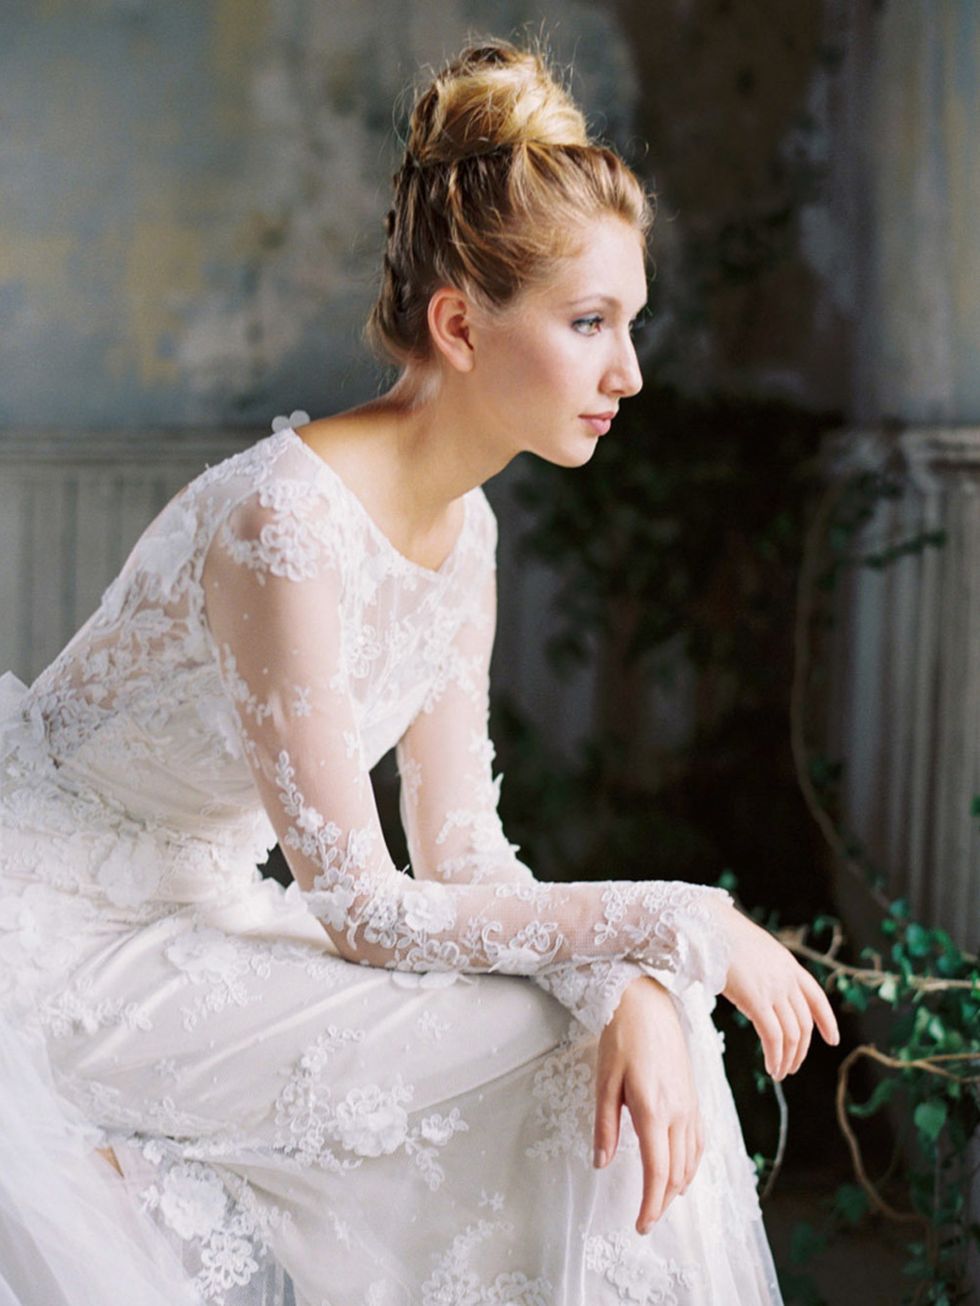 Clothing, Hairstyle, Sleeve, Dress, Shoulder, Photograph, Bridal clothing, Gown, Sitting, Wedding dress, 